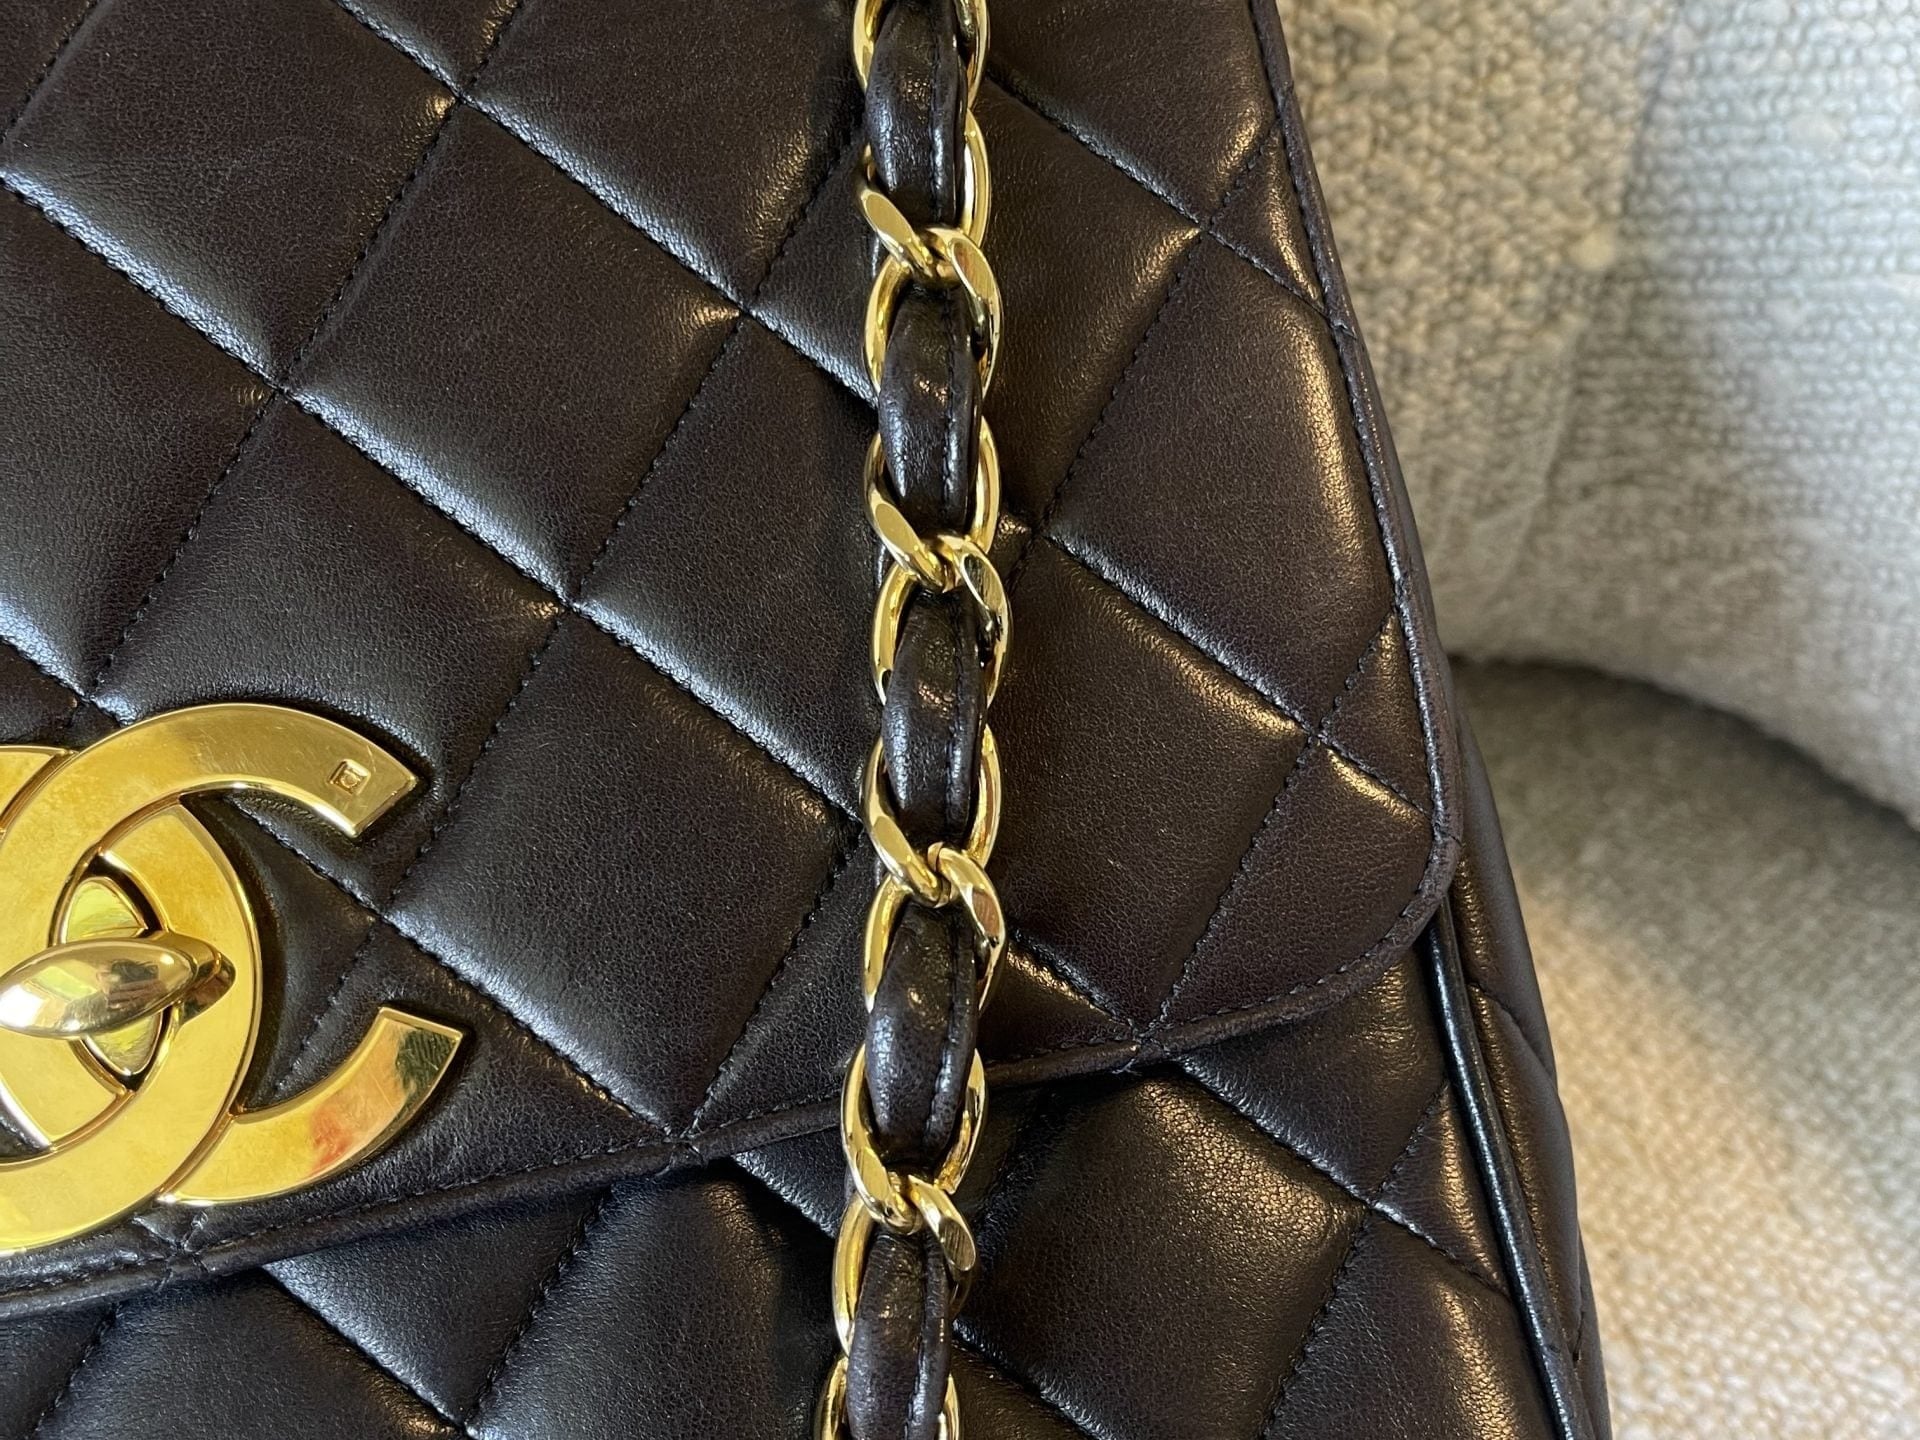 CHANEL Handbag Brown Vintage Lambskin Quilted Square Classic GHW (Shoulder Bag) - Redeluxe